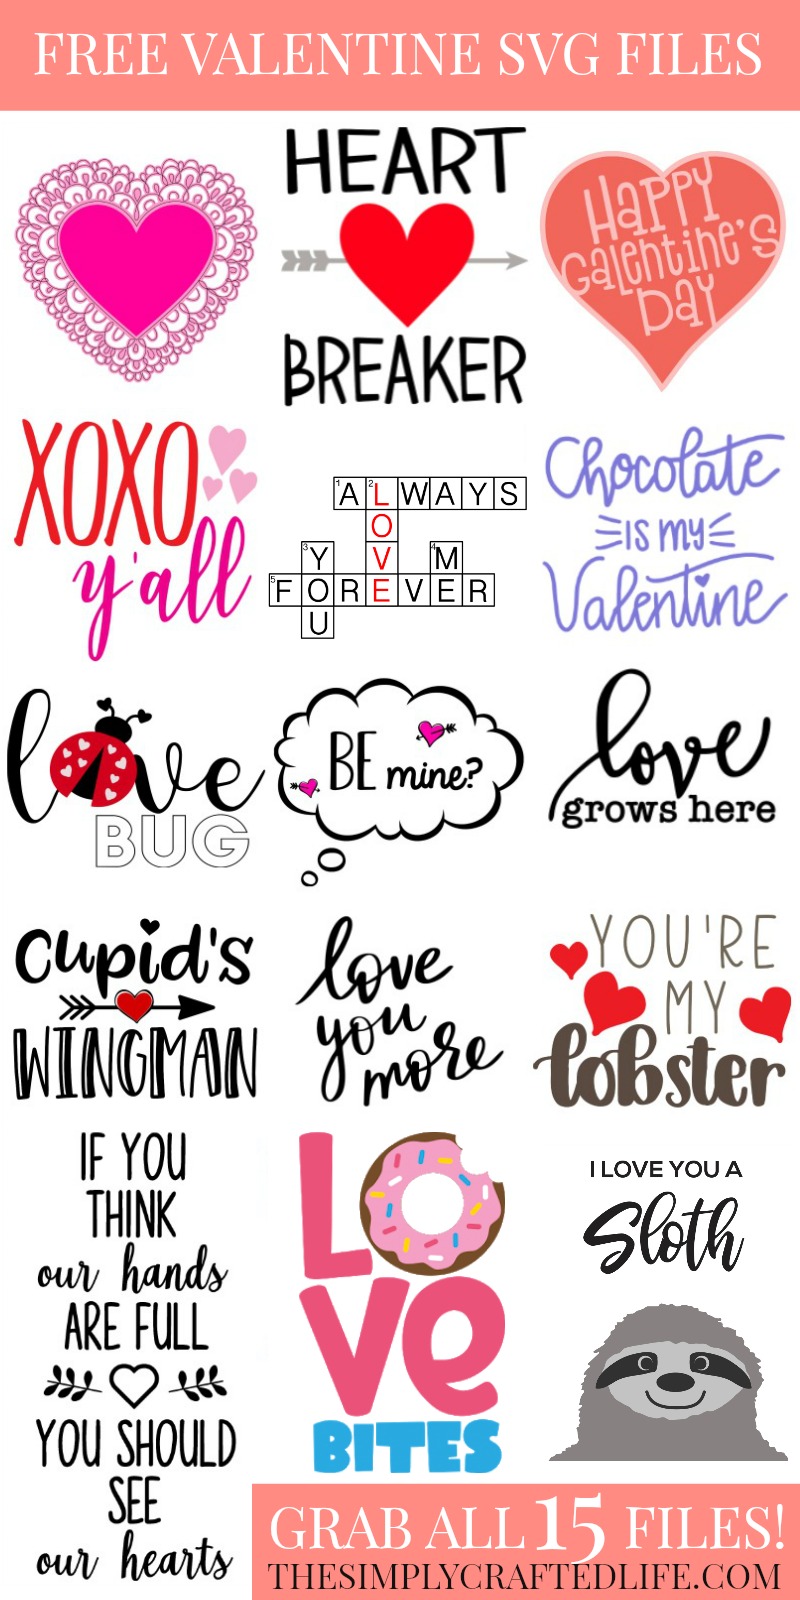 15 Free Valentine's Day SVG Cut Files to Download